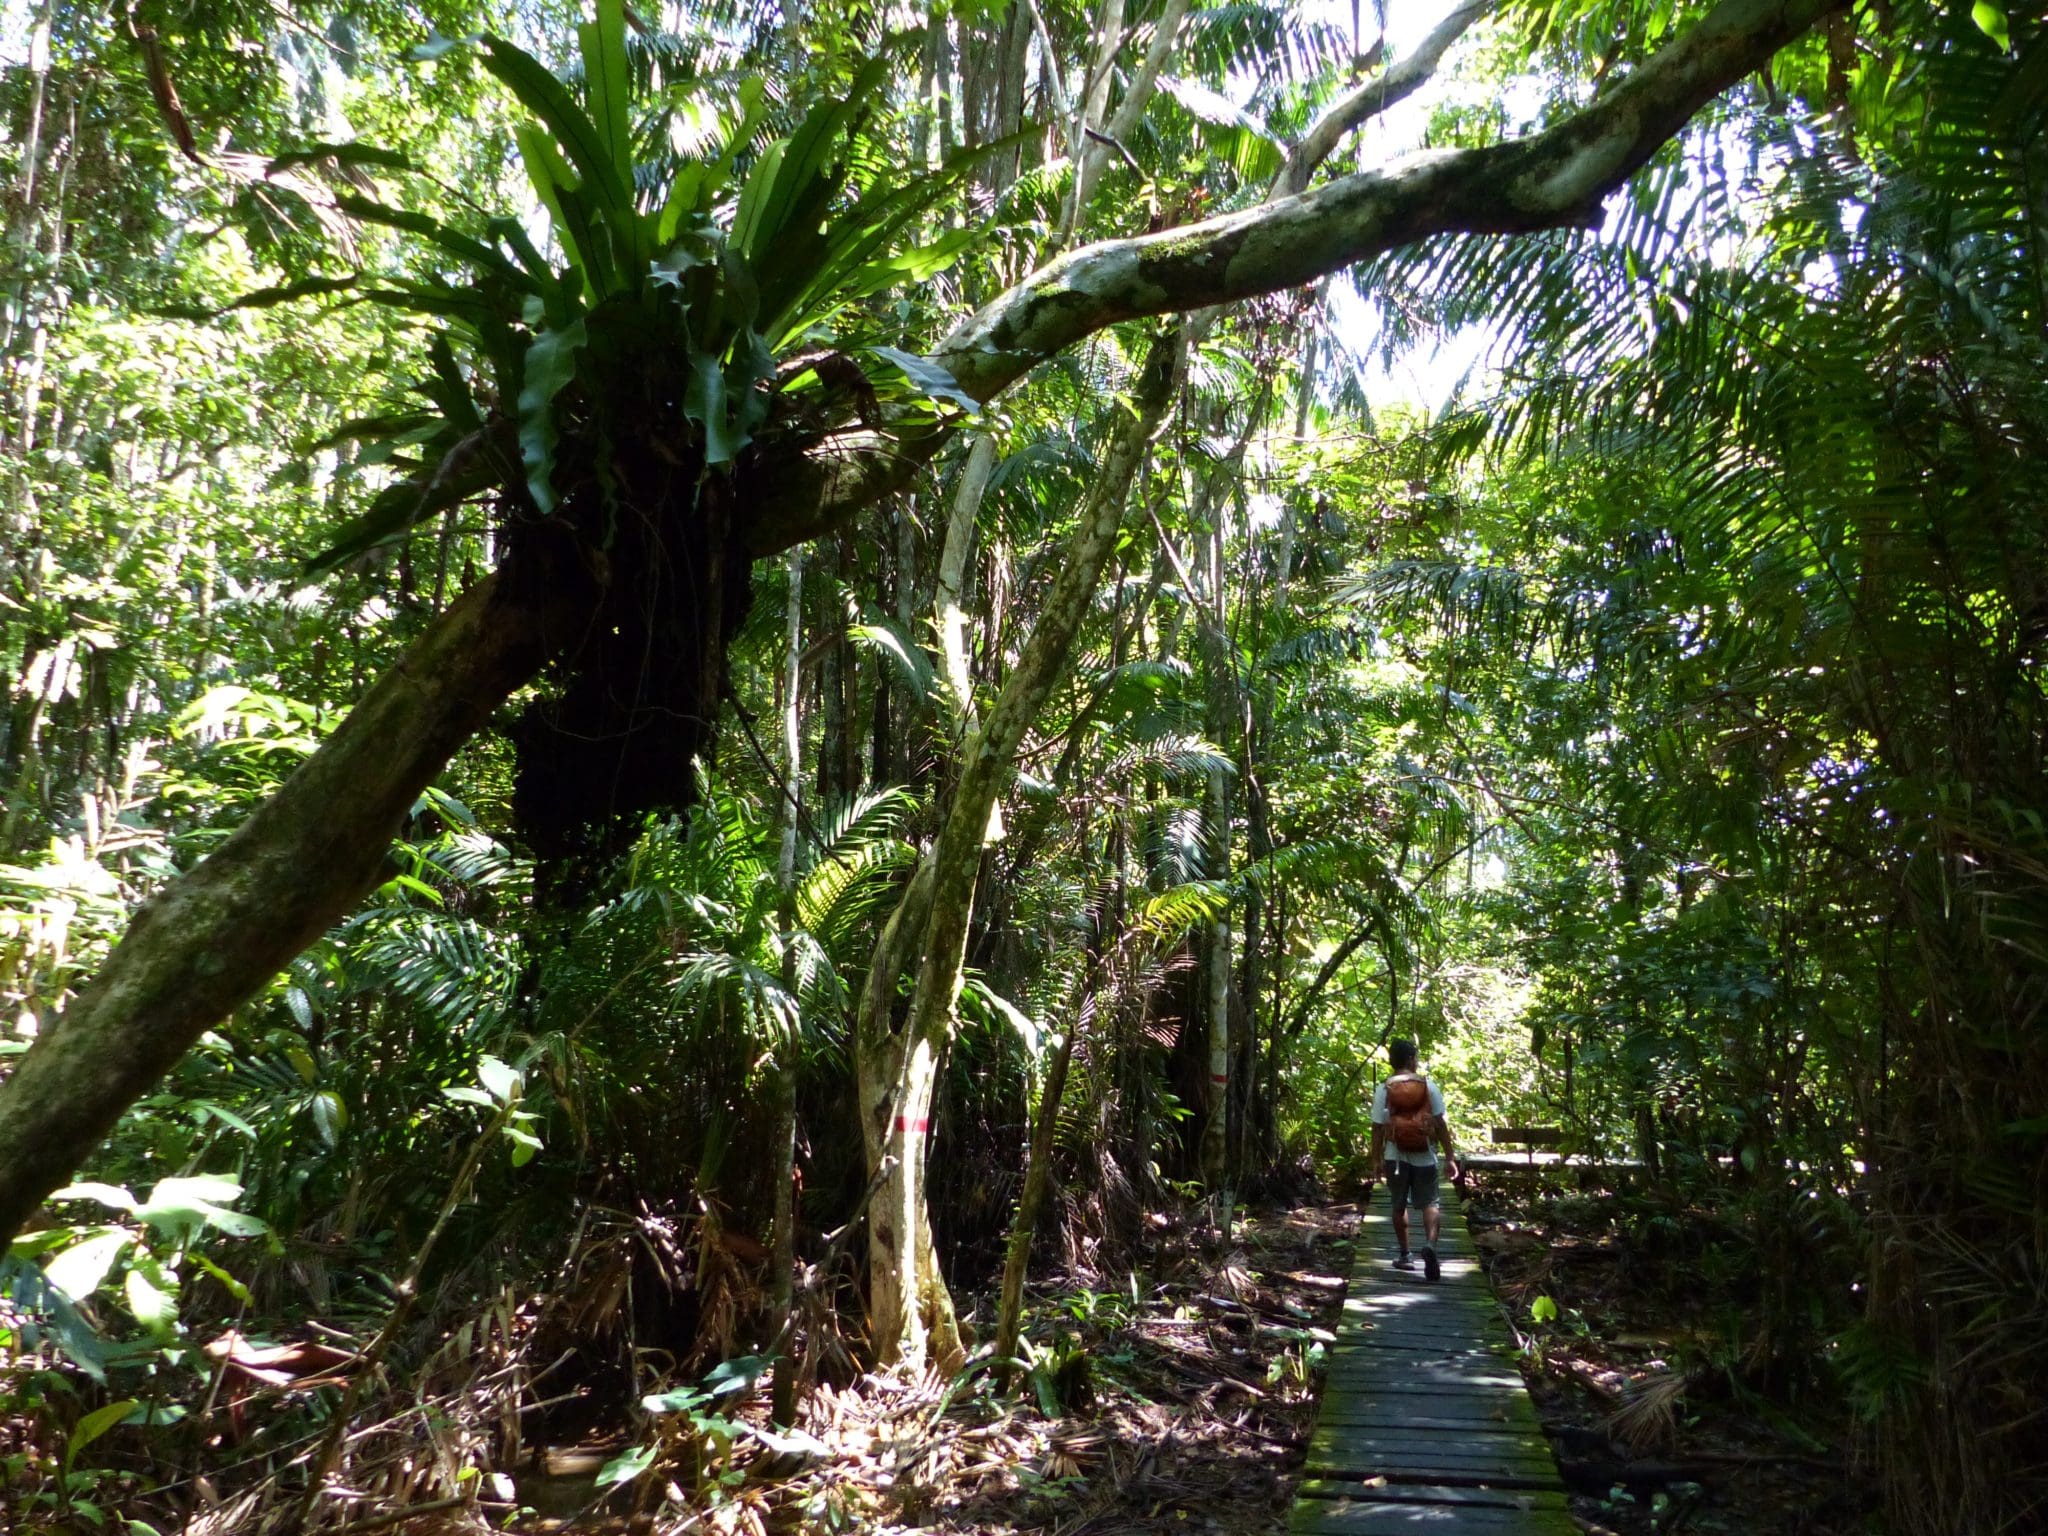 In Bako National Park, on the trail of the Colugo